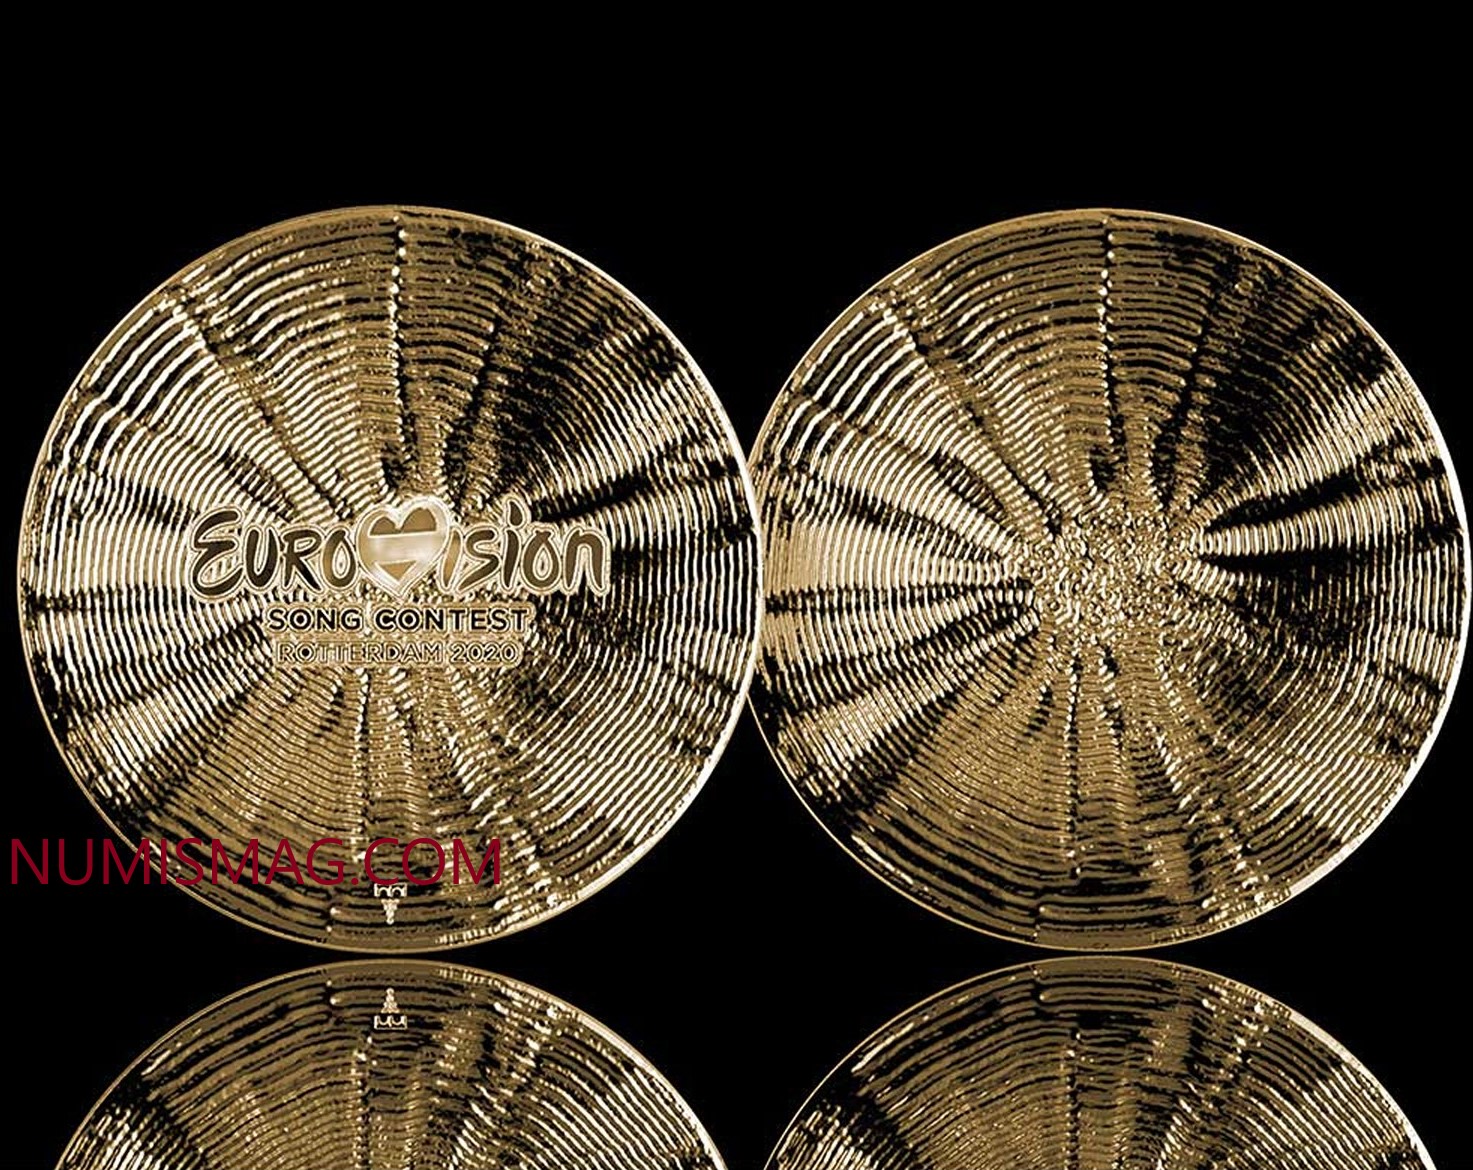 In 2020, Netherlands celebrate Eurovision song contest with a coin!